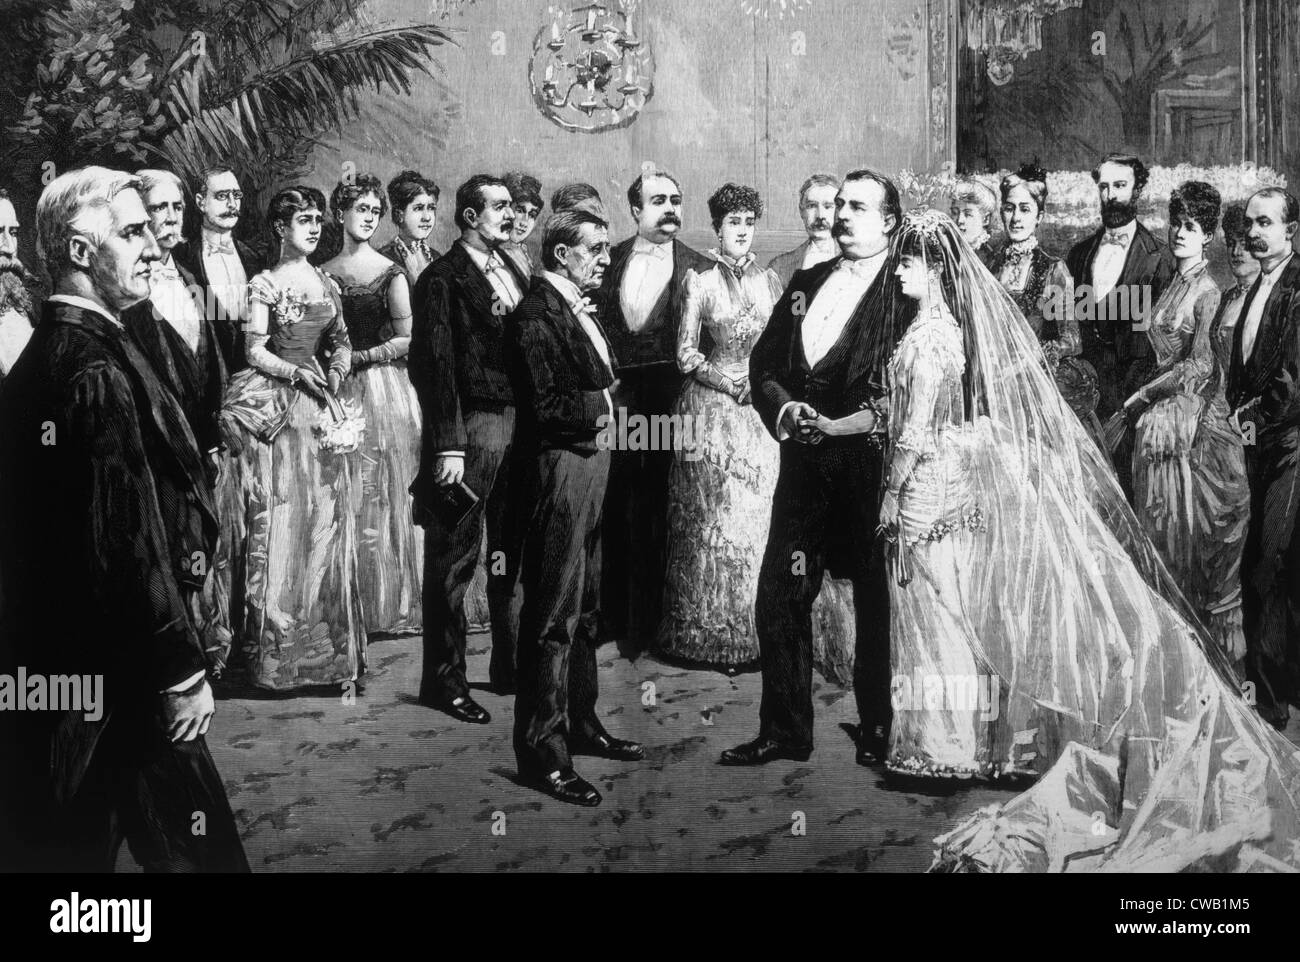 Grover Cleveland (1837-1908), U.S. President from 1885-1889 and 1893-1897, marrying Frances Folsom in the White House, 1886 Stock Photo